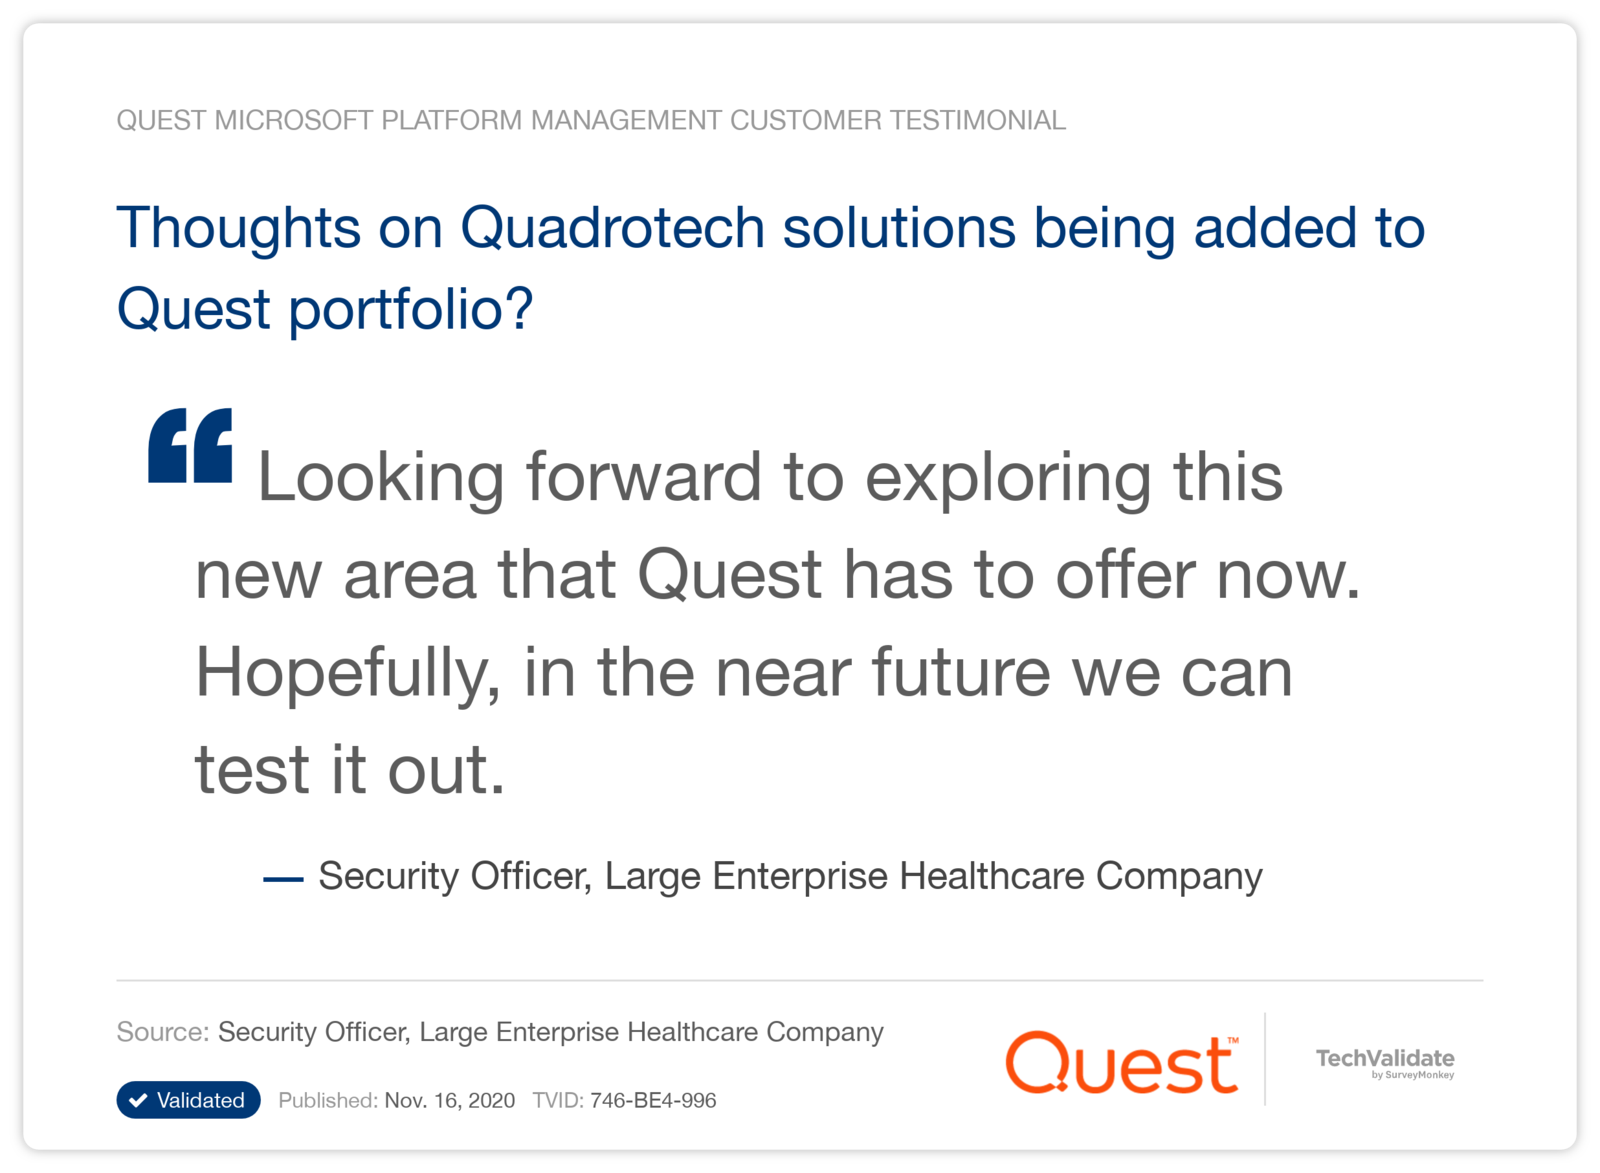 Thoughts on Quadrotech solutions being added to Quest portfolio?